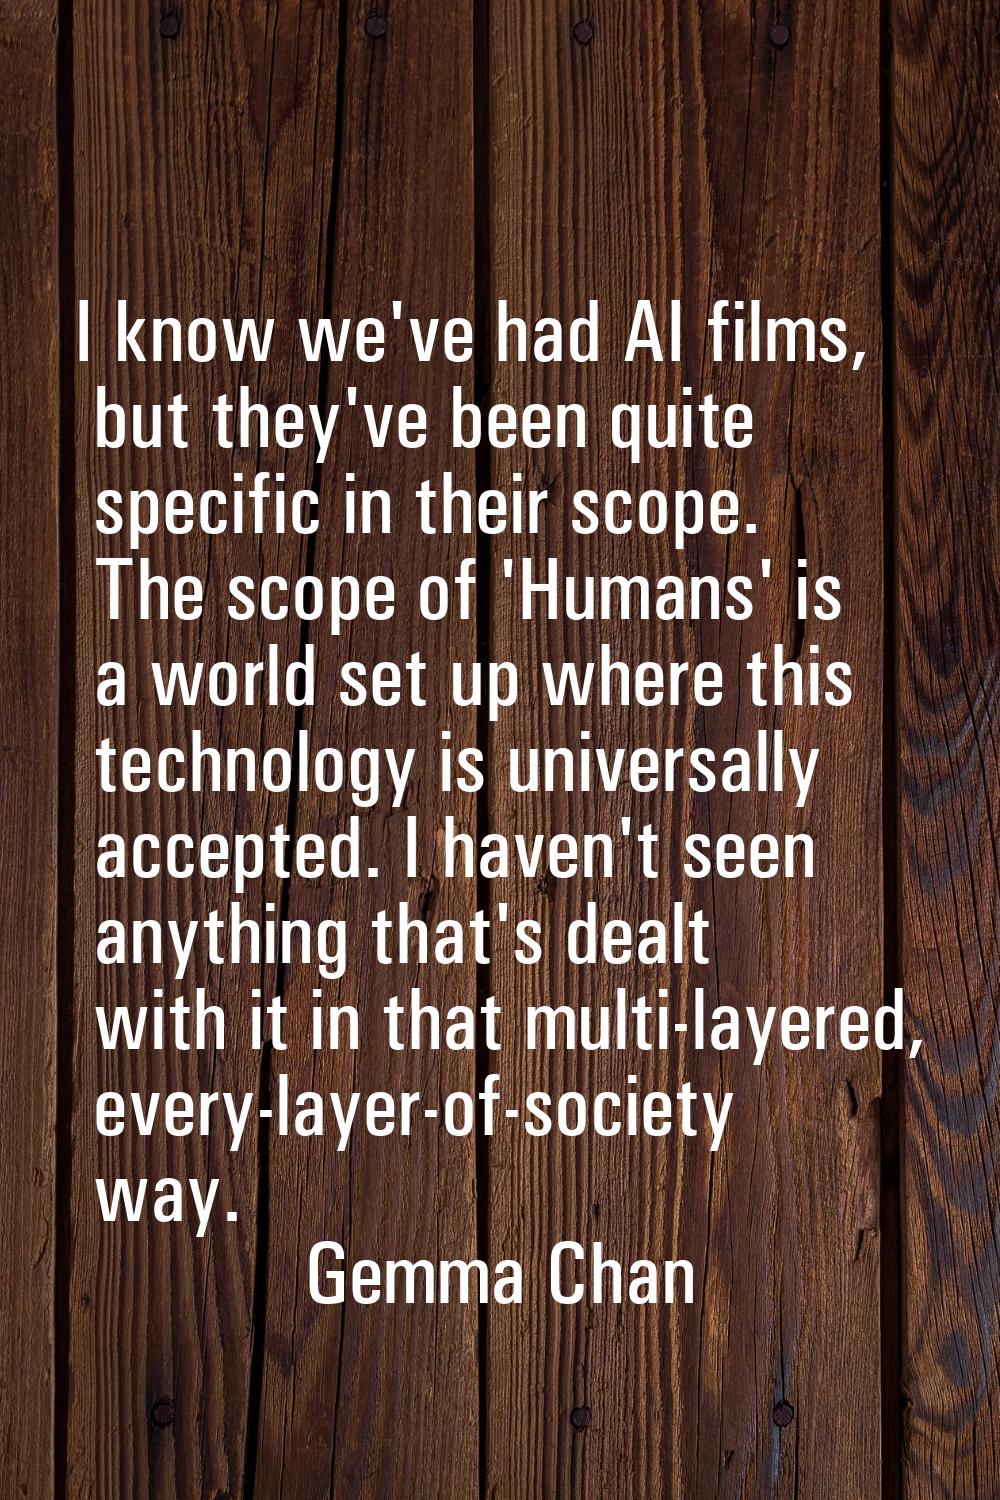 I know we've had AI films, but they've been quite specific in their scope. The scope of 'Humans' is